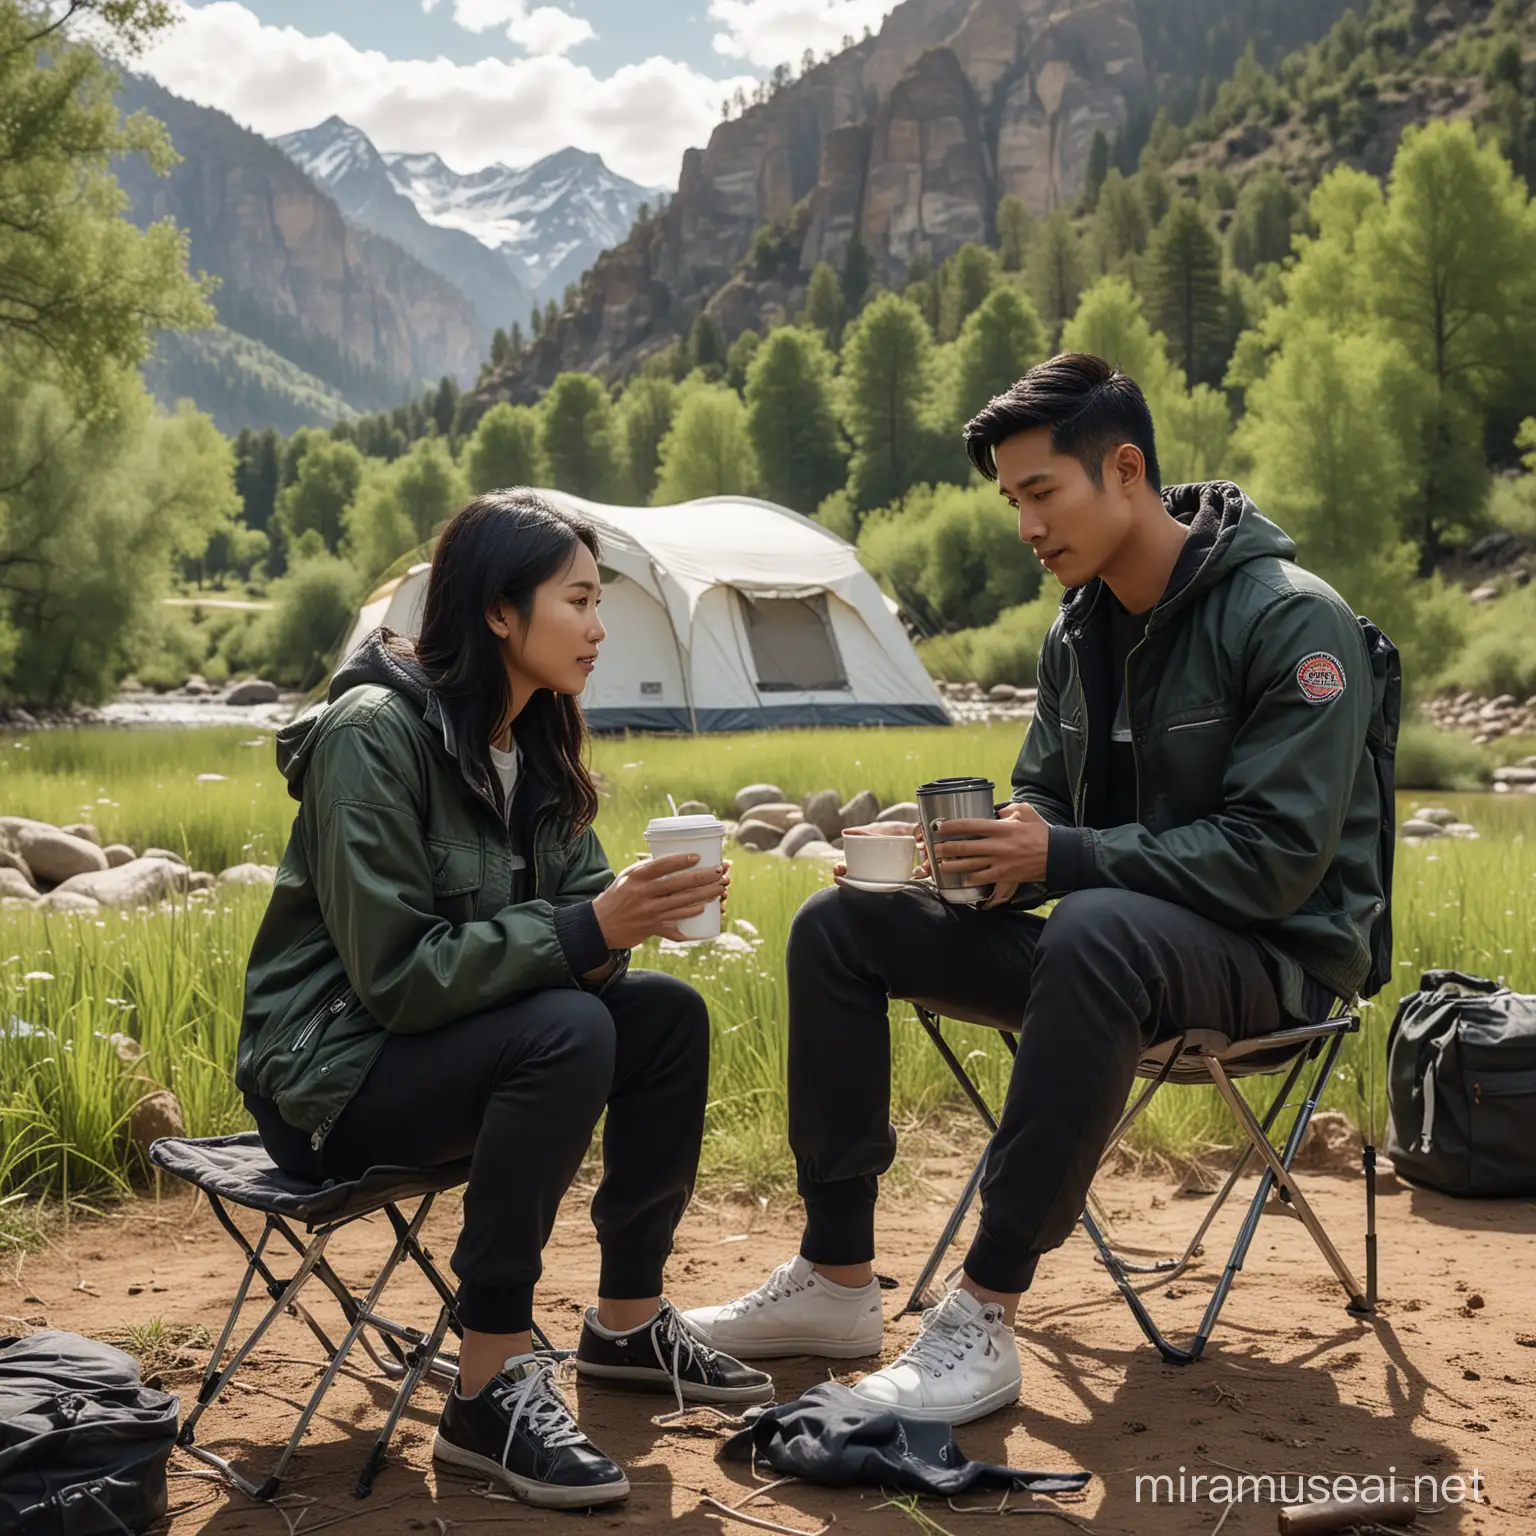 A beautiful asian woman with medium black hair and asian man sits on a portable folding chair in front of a tent.they has a clean face and is wearing a black trucker jacket, black pants, and white shoes. In her hand, she holds a cup of hot coffee, while a thermos of hot water is placed on a portable folding table beside her. The scene is set on the banks of the American River, with vibrant green and fresh grass surrounding her. In the background, tall mountains covered in dense forests serve as a backdrop. The sky is adorned with white clouds, casting minimal light on the scene. The image is captured in ultra HD, showcasing the original photo with high detail and sharpness. The aesthetic of the image leans towards realism, with a photography style reminiscent of a Leica camera.